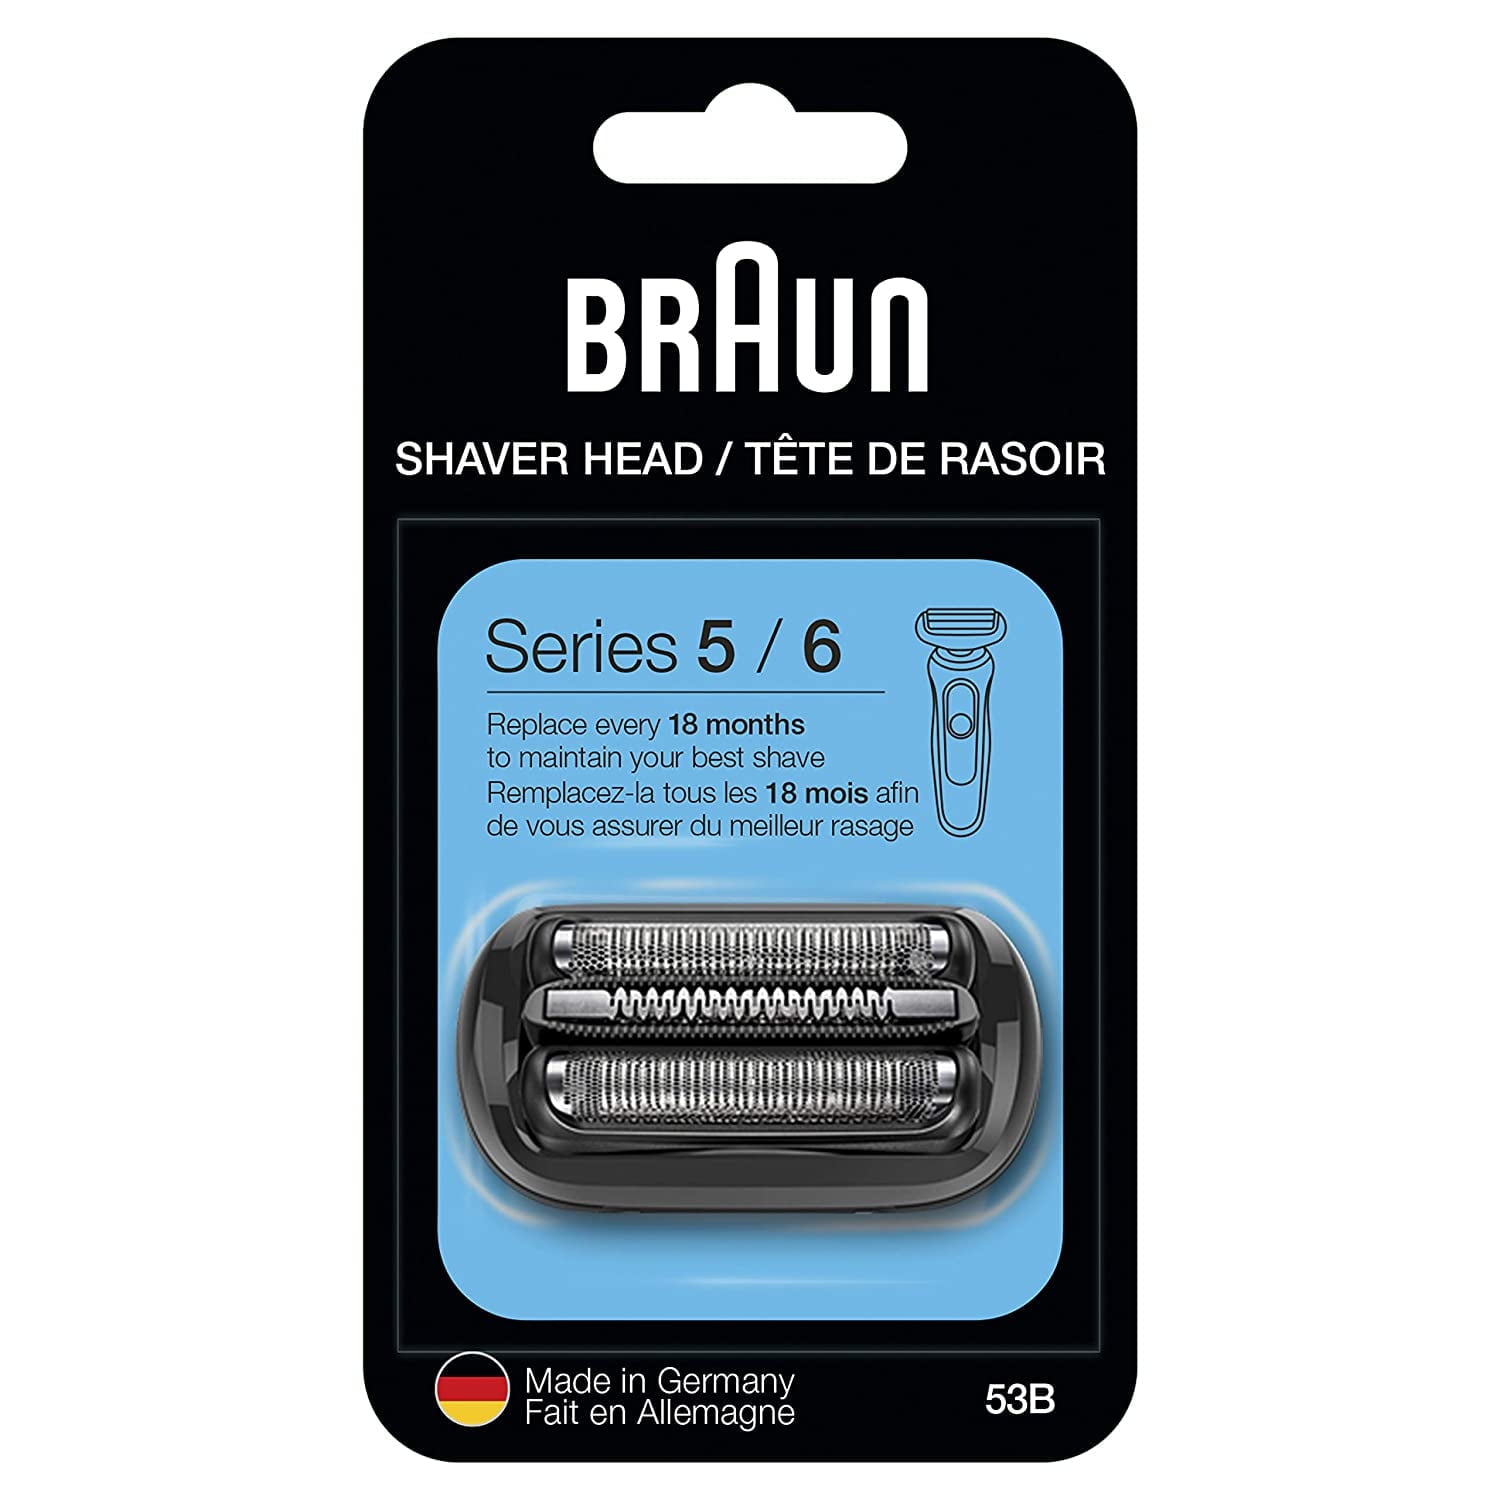 Series 5 and 6 Electric Shaver Replacement Head for Braun Shavers - 53B -  Compatible with Braun Razors 5020s, 5018s, 5050cs, 6020s, 6075cc